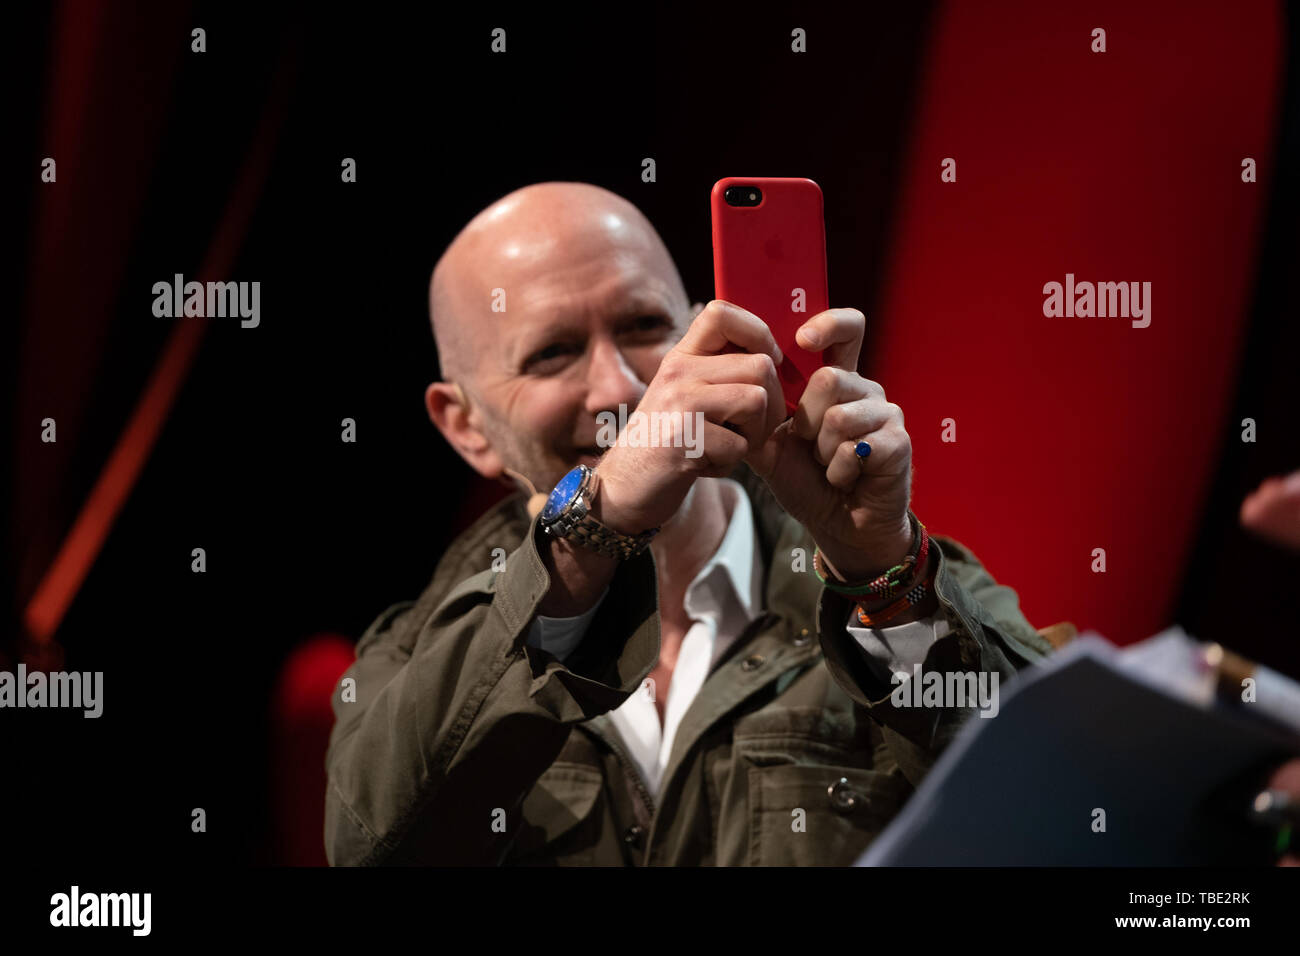 The Hay Festival, Hay on Wye, Wales UK , Saturday 01 June 2019.   Simon Sebag Montefiore, historian and writer, takes a photo of the audience from the stage  at the 2019 Hay Festival   The festival, now in its 32nd year, held annually in the small town of Hay on Wye on the Wales - England border,  attracts the finest writers, politicians and intellectuals from  across the globe for 10 days of talks and discussions, celebrating the best of the written word and critical debate  Photo © Keith Morris / Alamy Live News Stock Photo